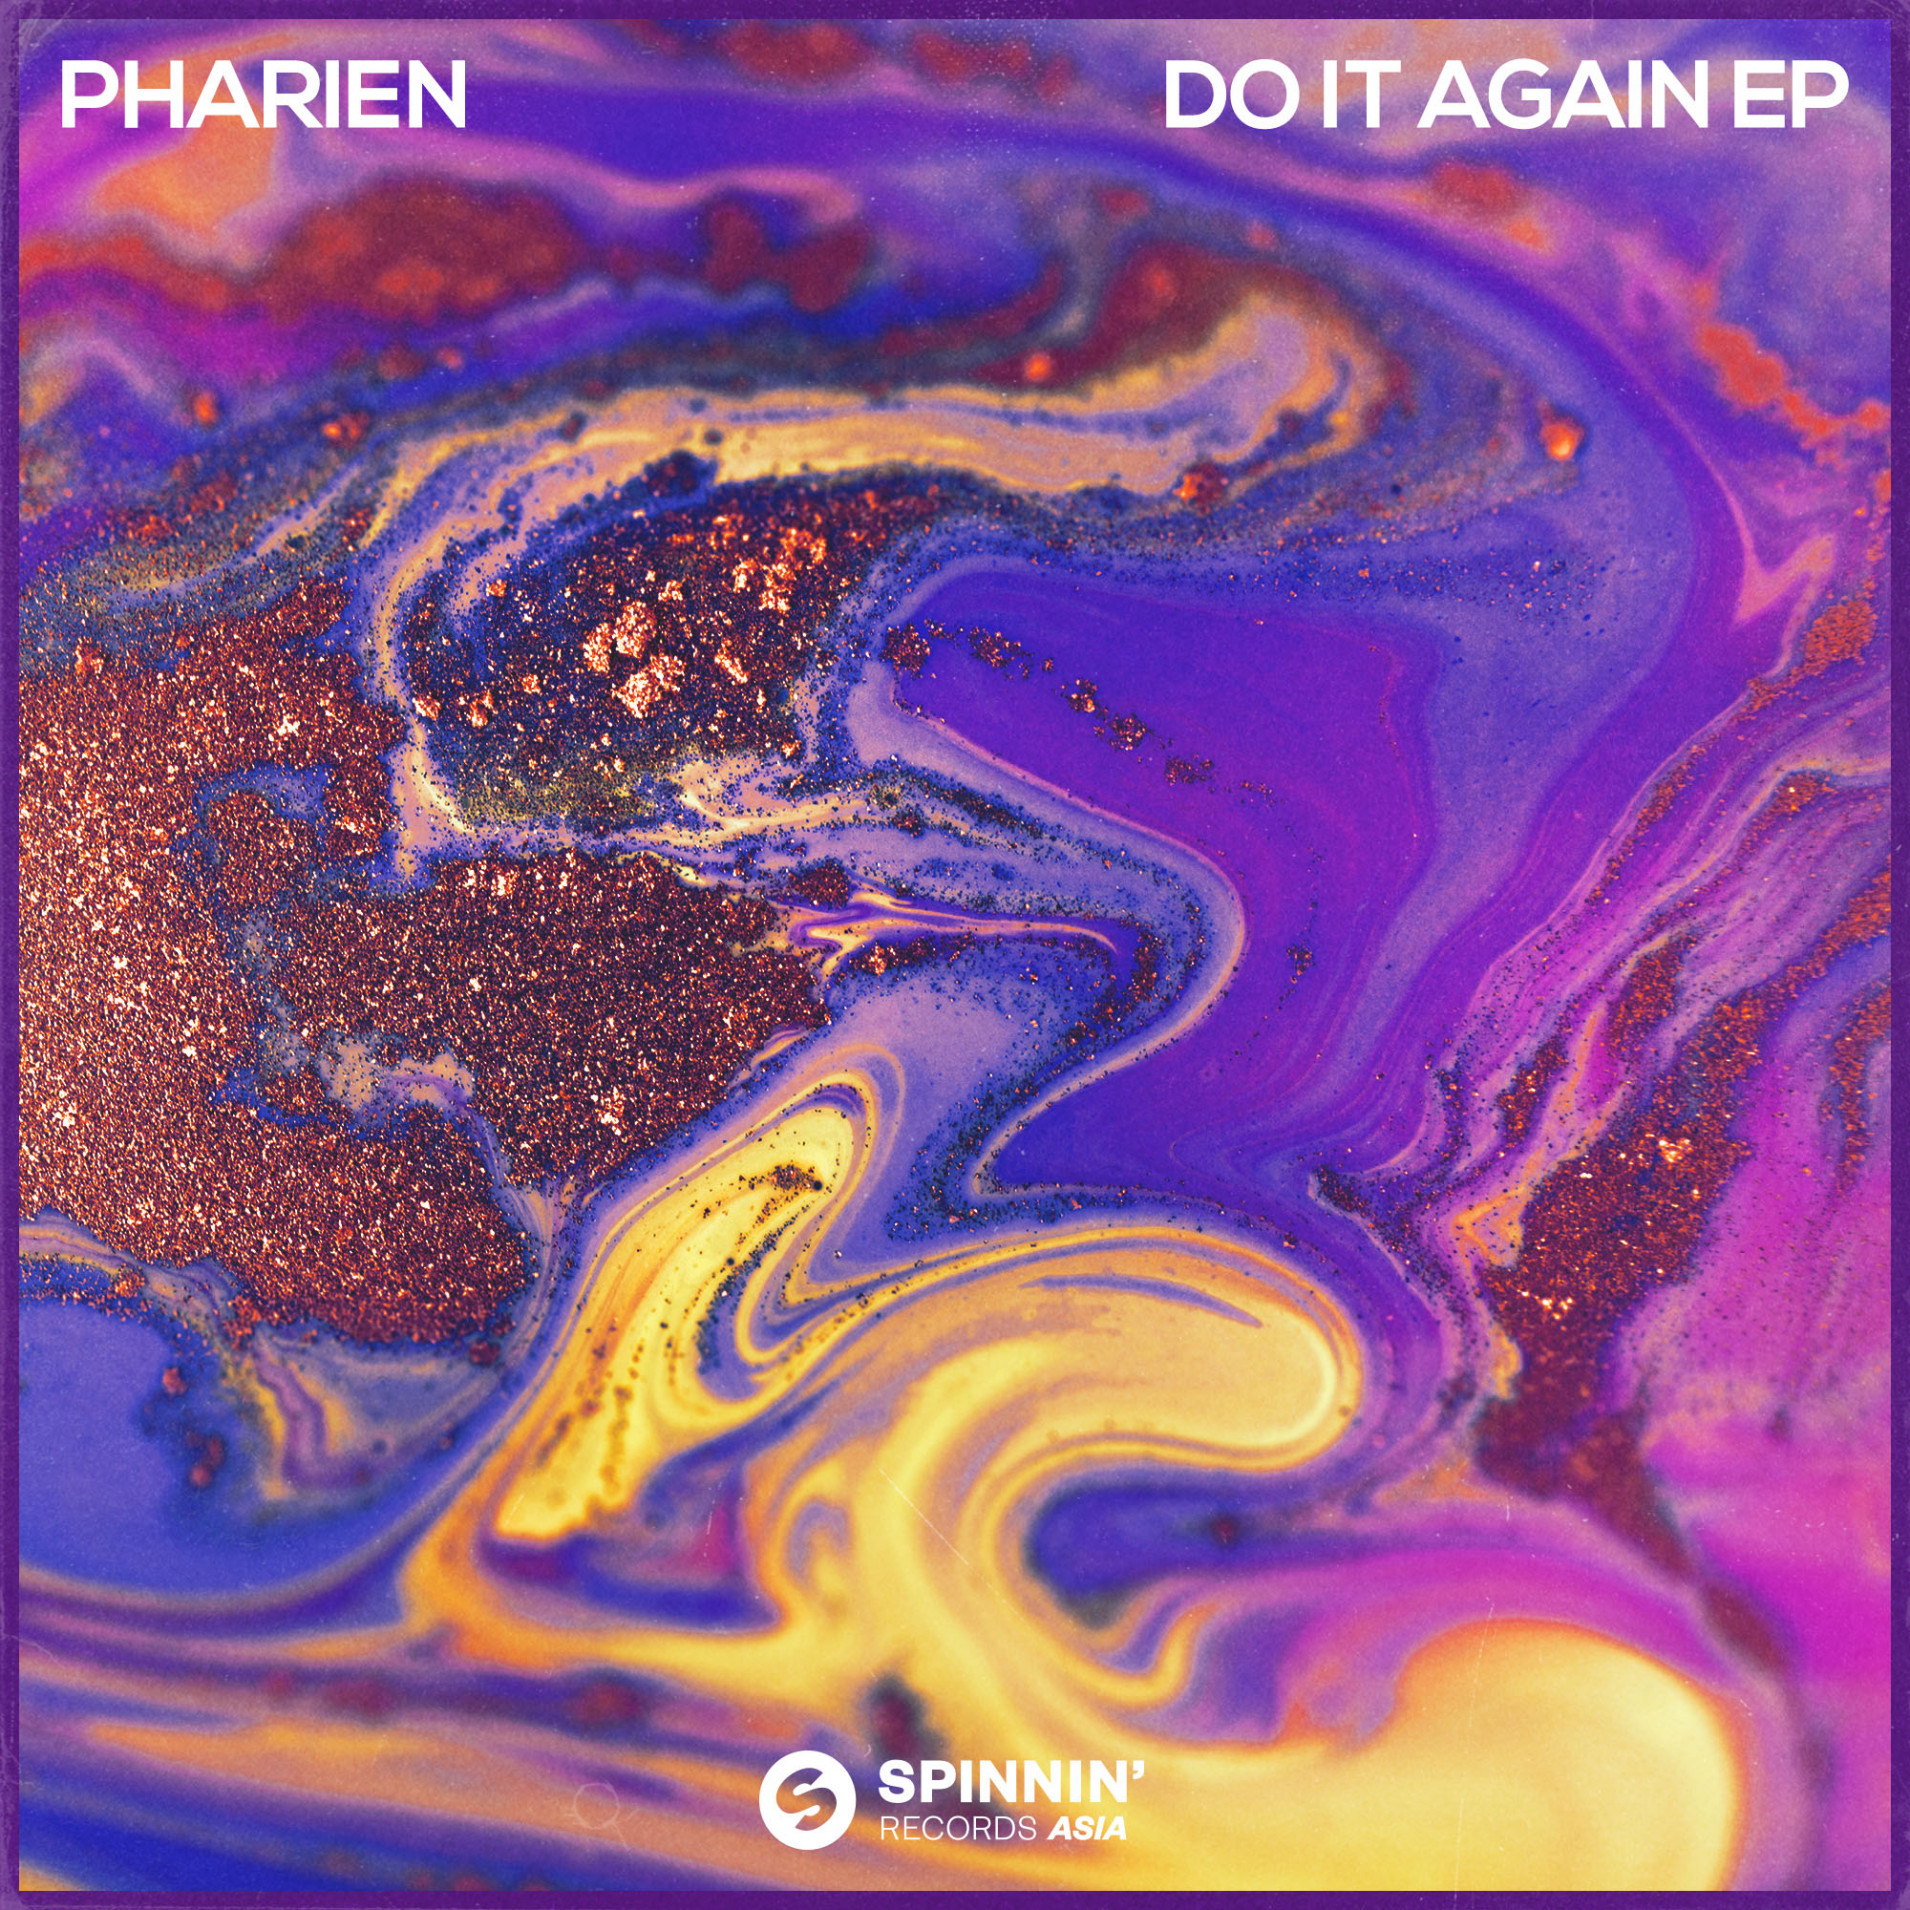 Pharien Do It Again Ep Spinnin Records Asia Spinnin Records Is responsible for this page. spinnin records